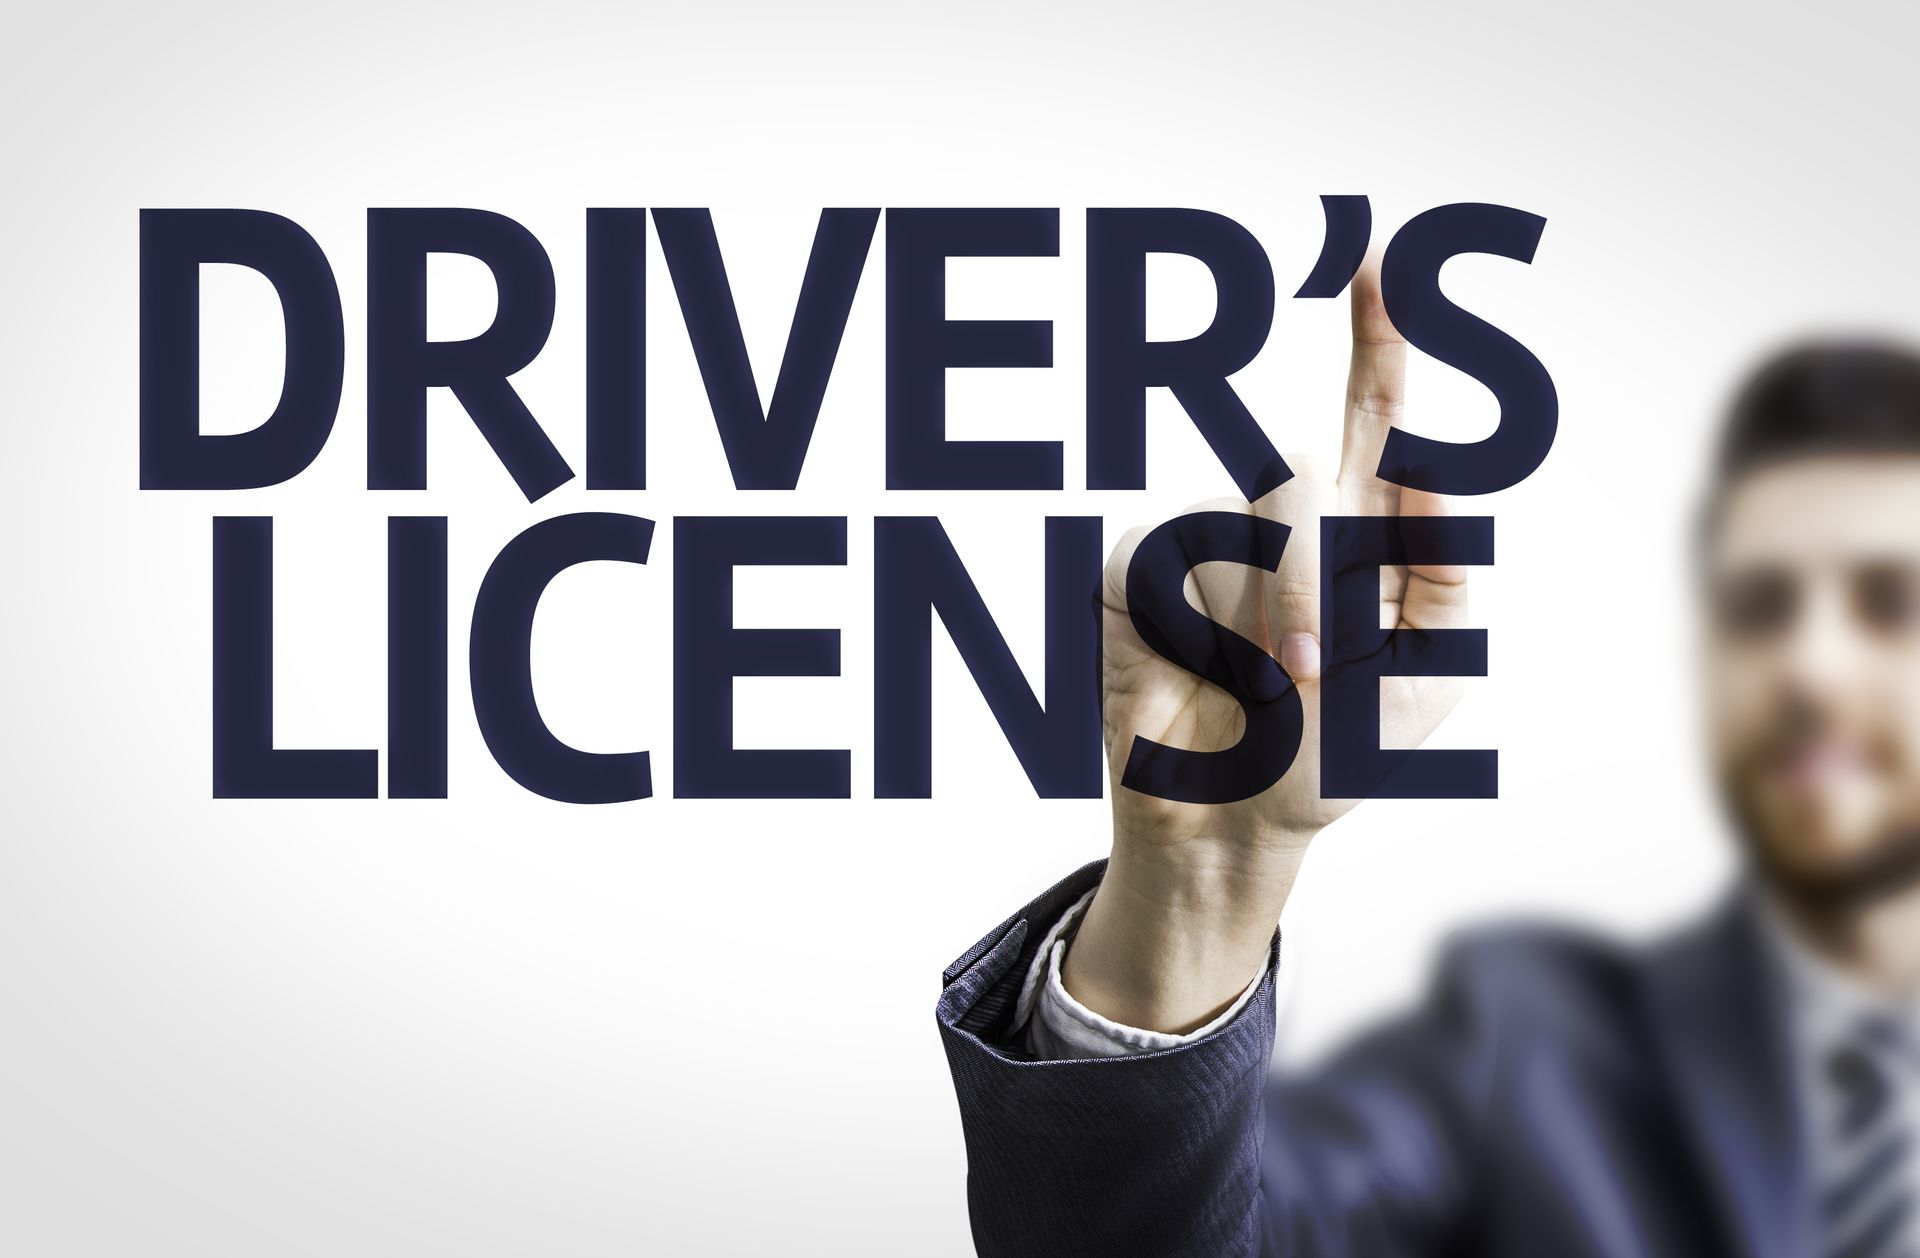 An Image of a man in a suit and tie holding his hands up and the phrase drivers license